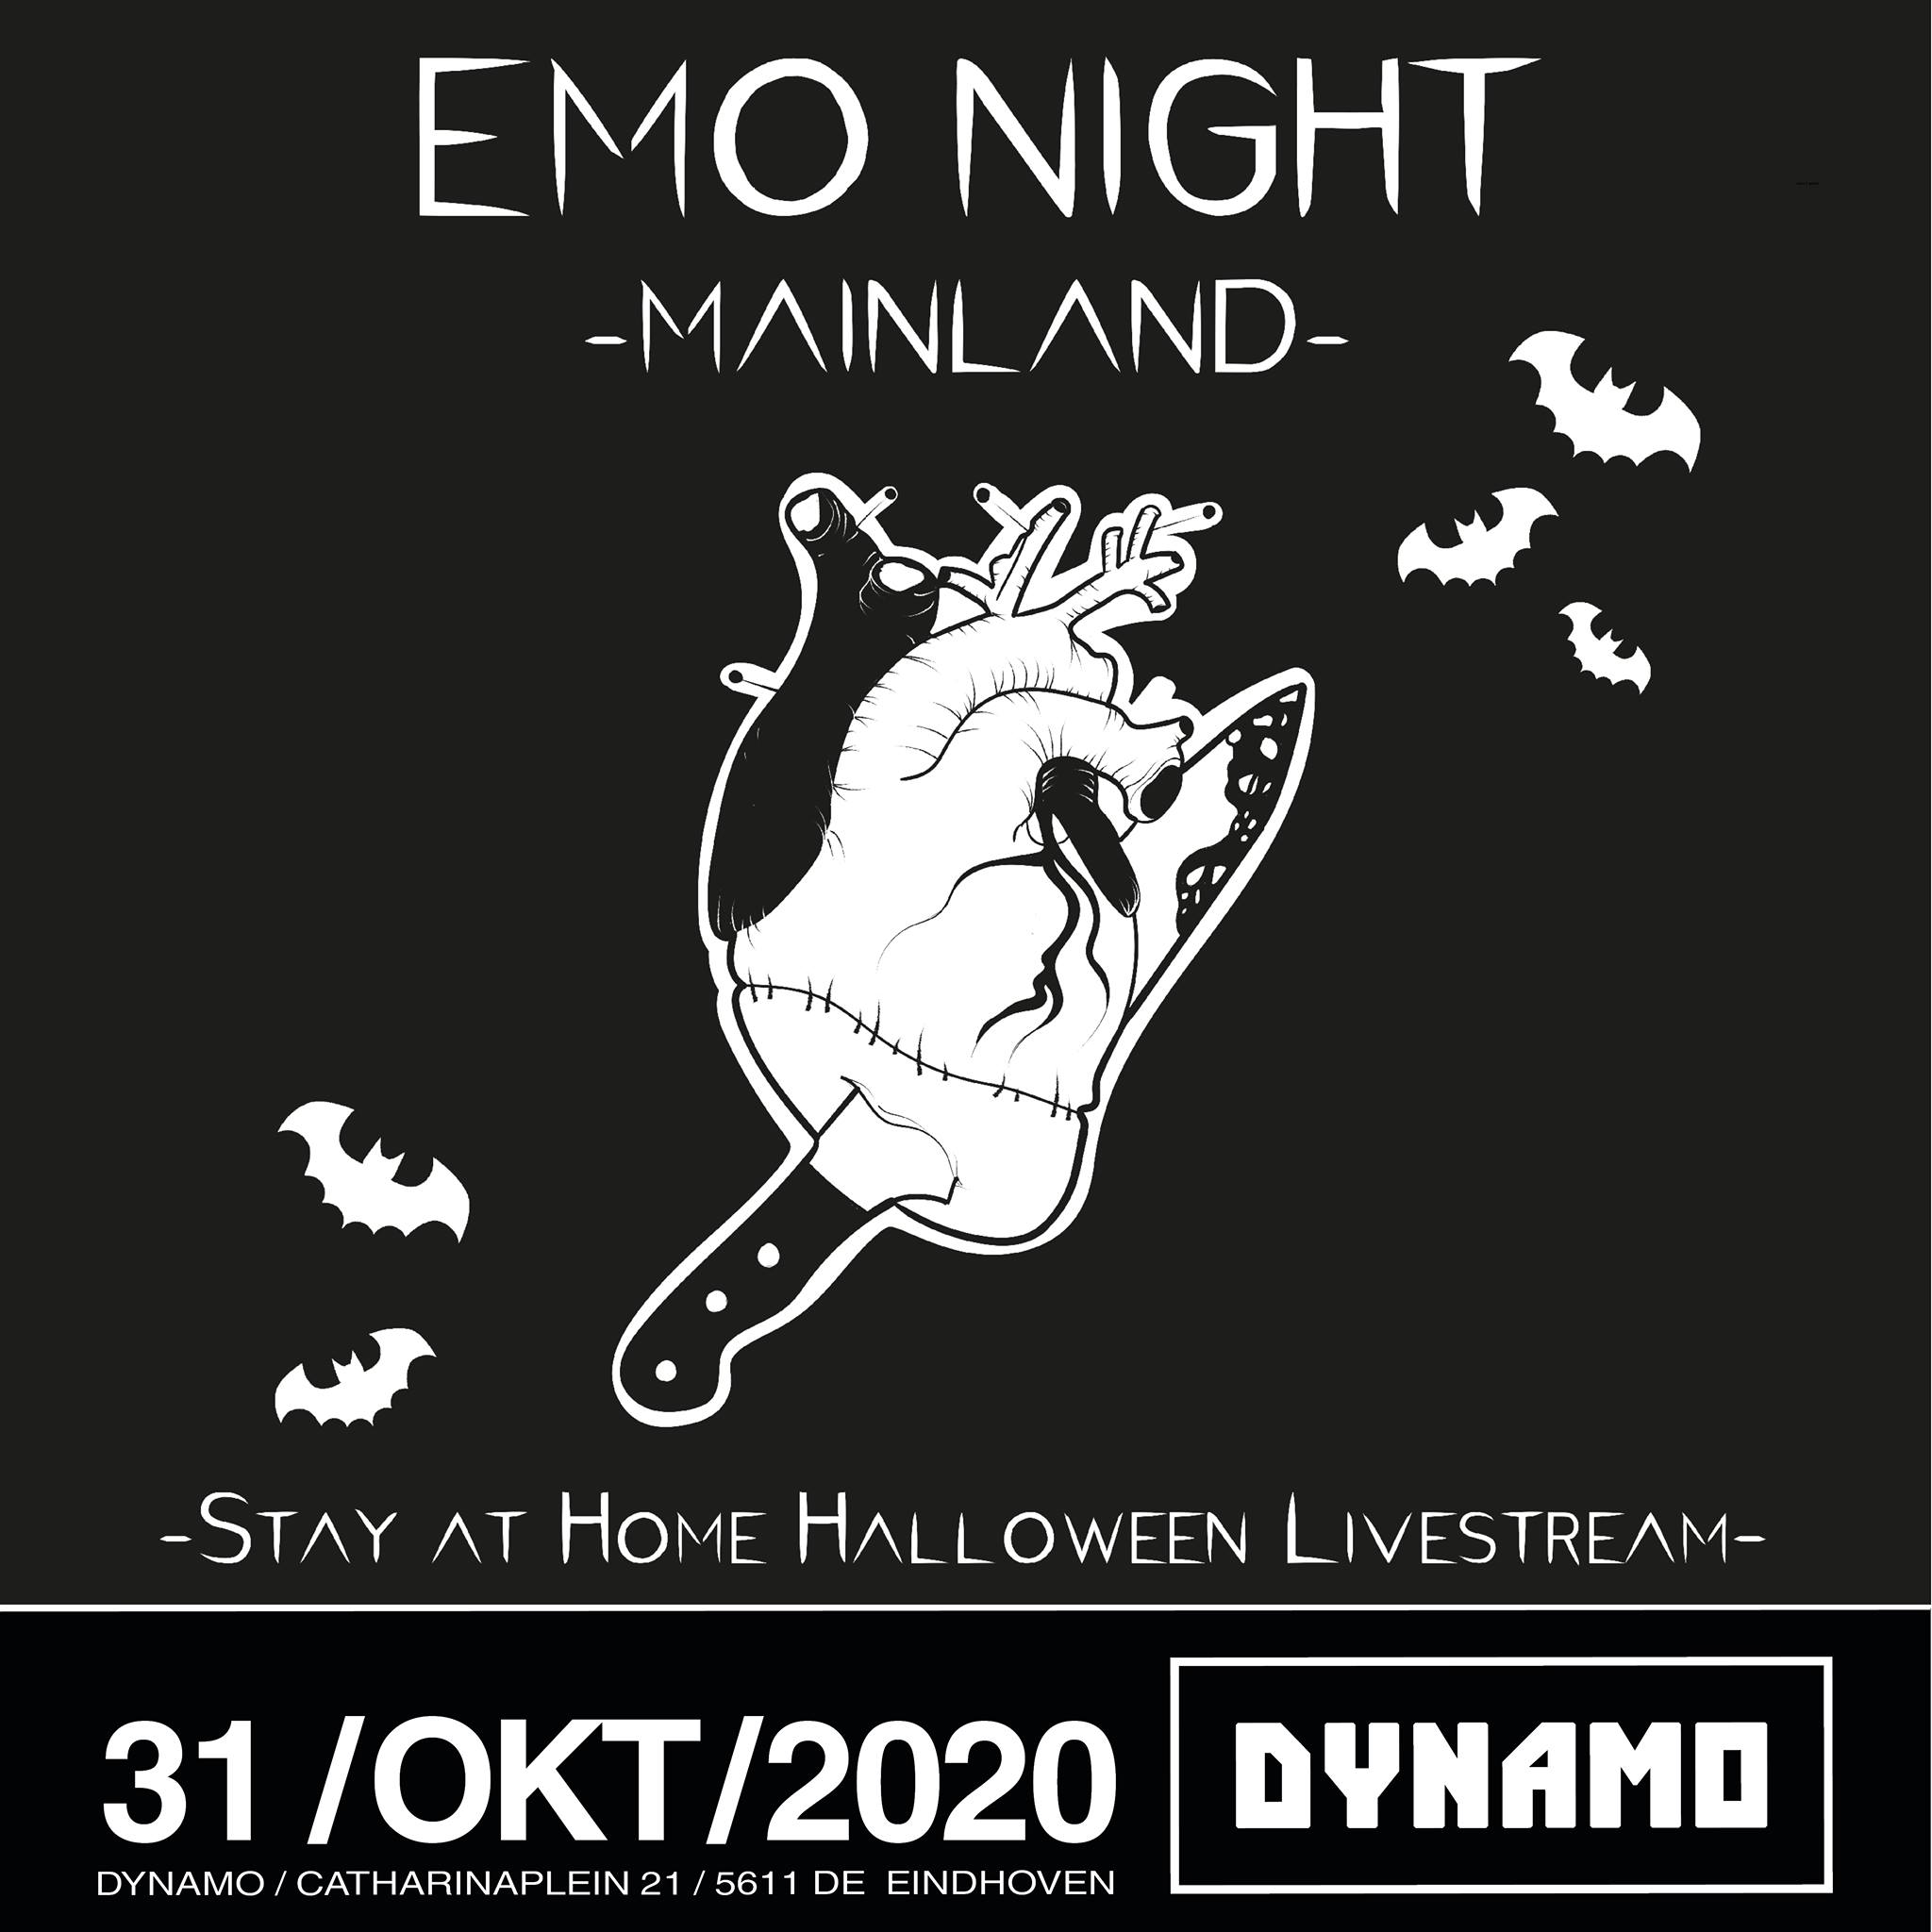 Emo Night Mainland - Stay At Home Halloween Livestream edition live from Dynamo